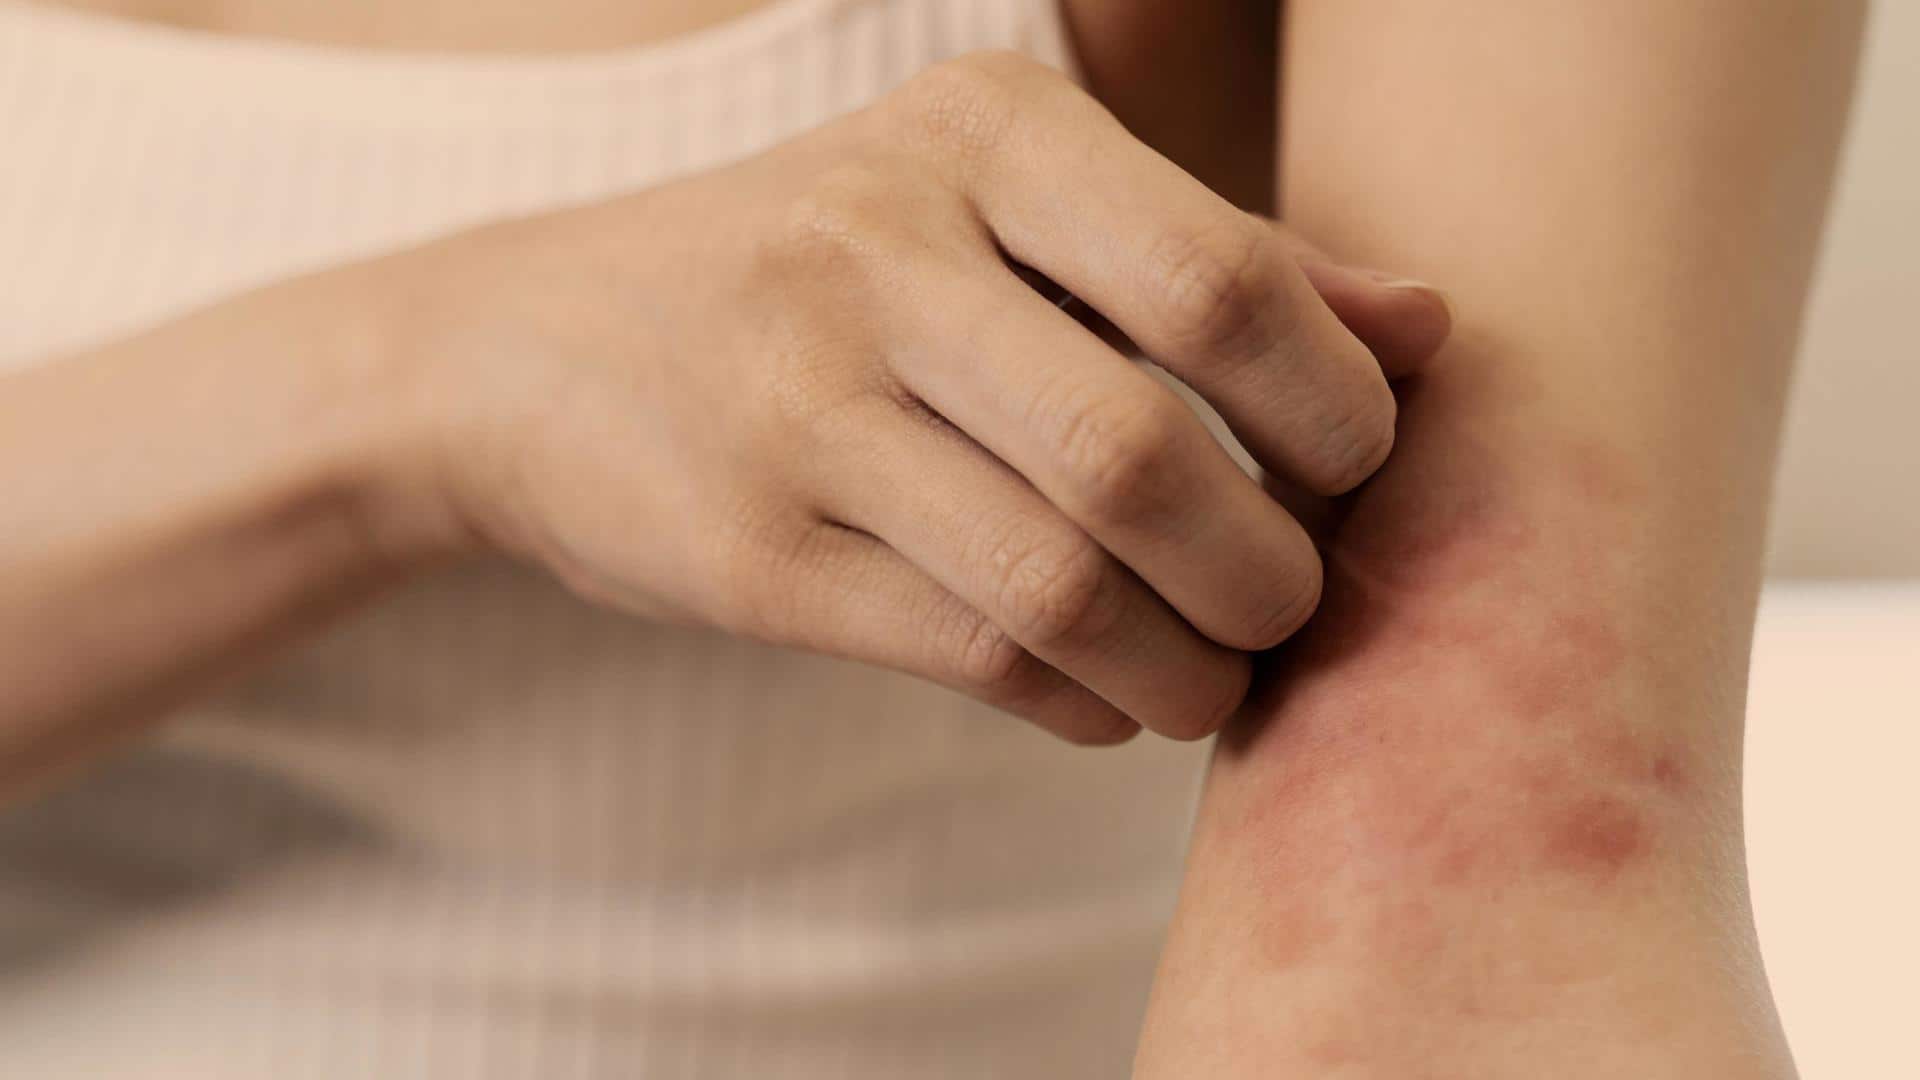 Dealing with skin rashes is easy with these home remedies